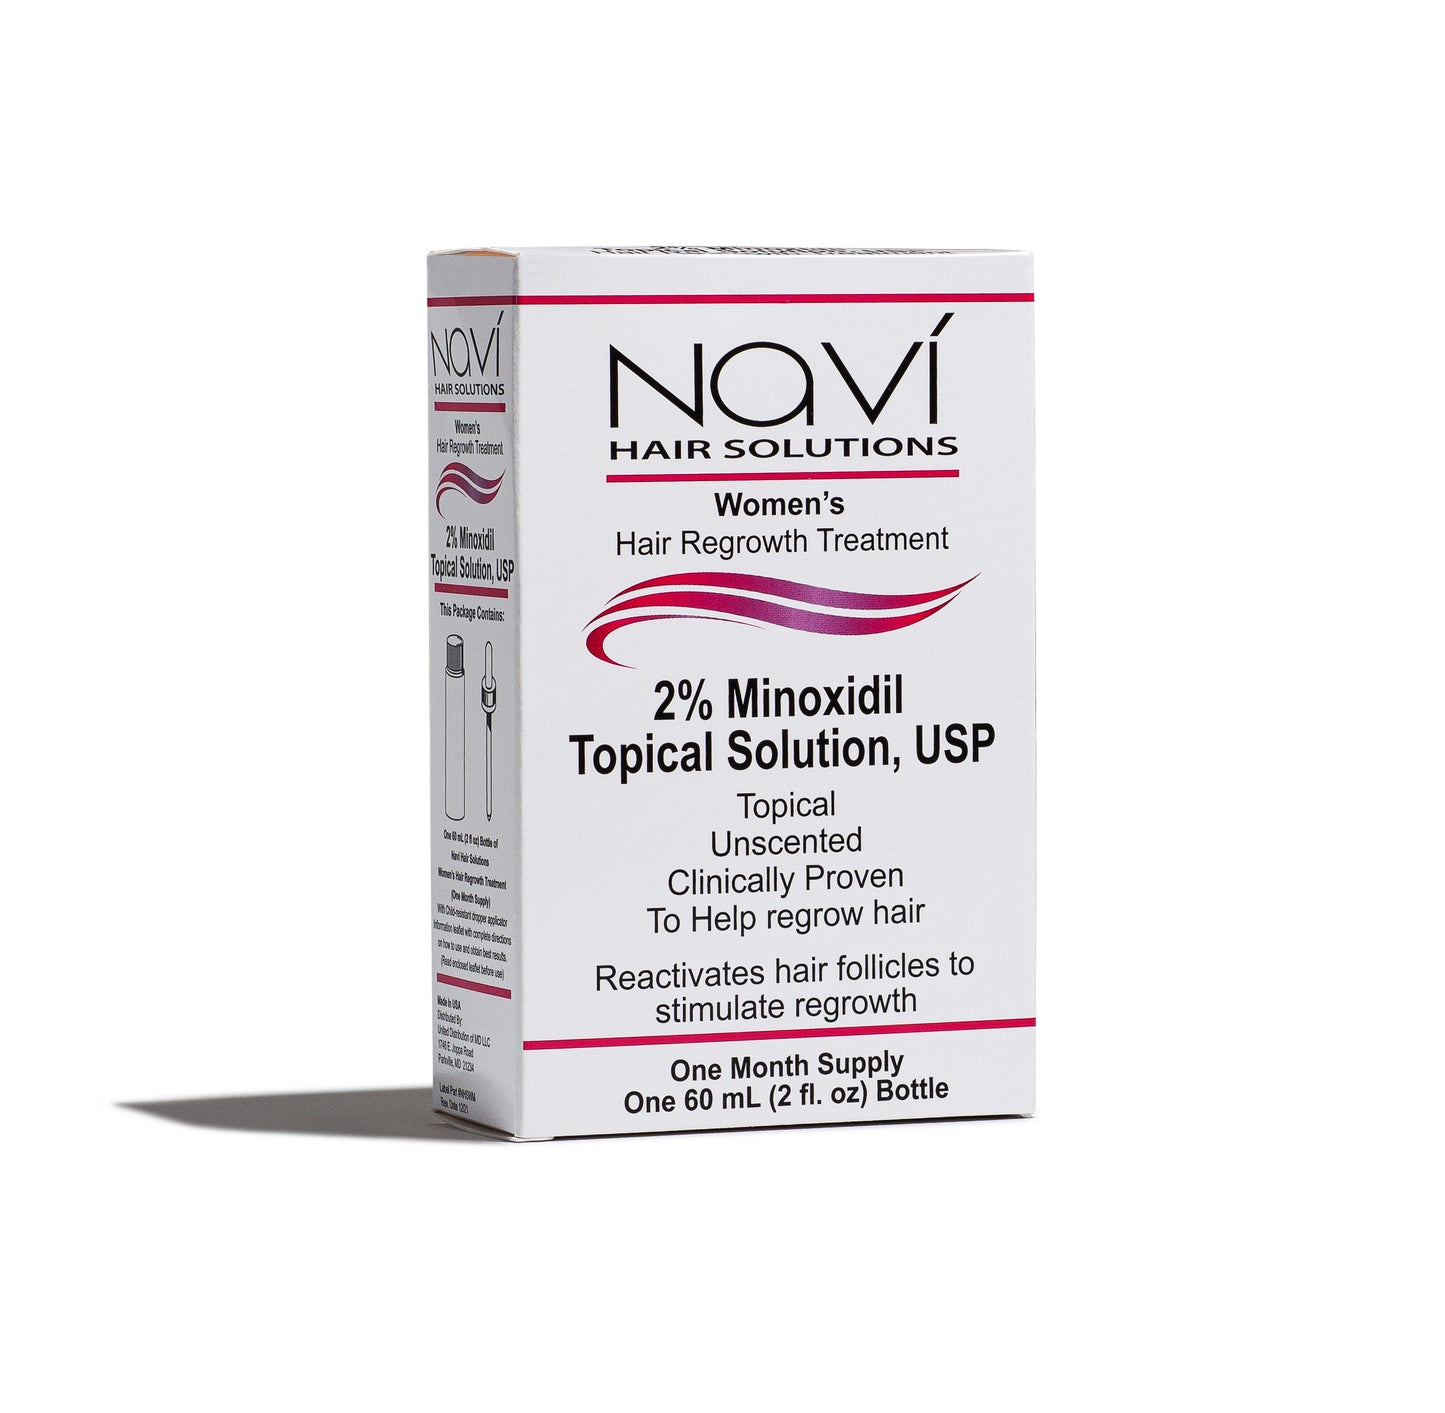 Women's 2% FDA Approved Minoxidil Topical clinically proven to regrow hair